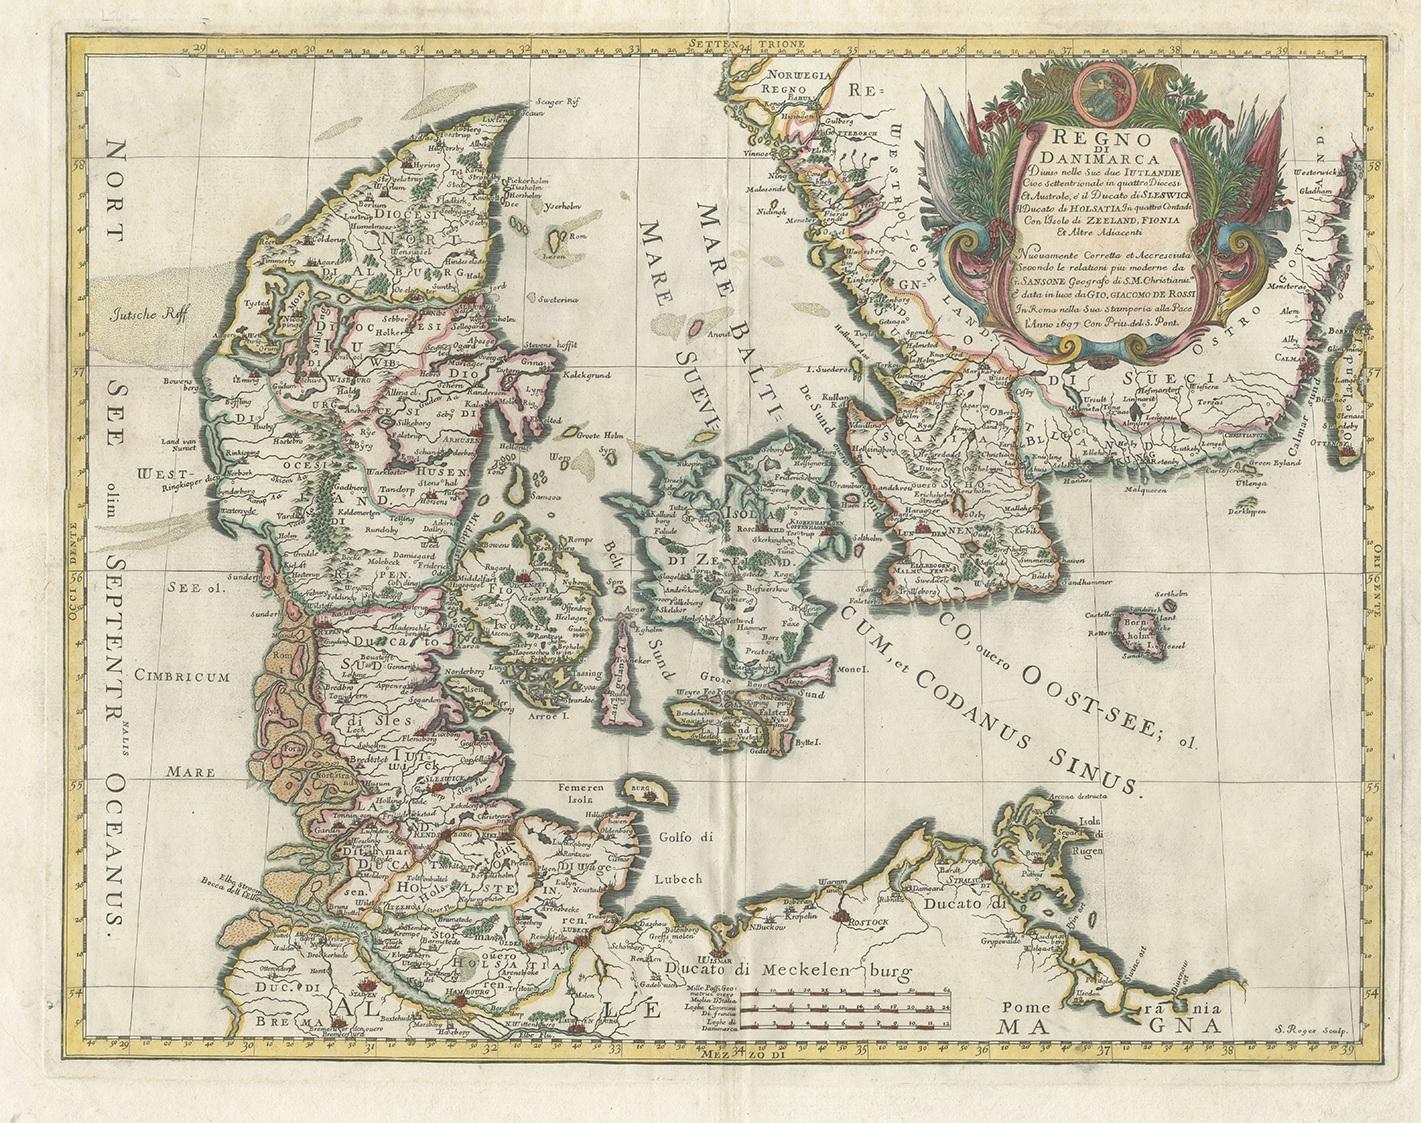 Antique map of Denmark titled 'Regno di Danimarca'. Old map of Denmark showing Jutland, Funen, Zealand, Lolland-Falster, Bornholm, etc. This map was engraved by S. Roges and published by Giovanni Giacomo de Rossi (1697).